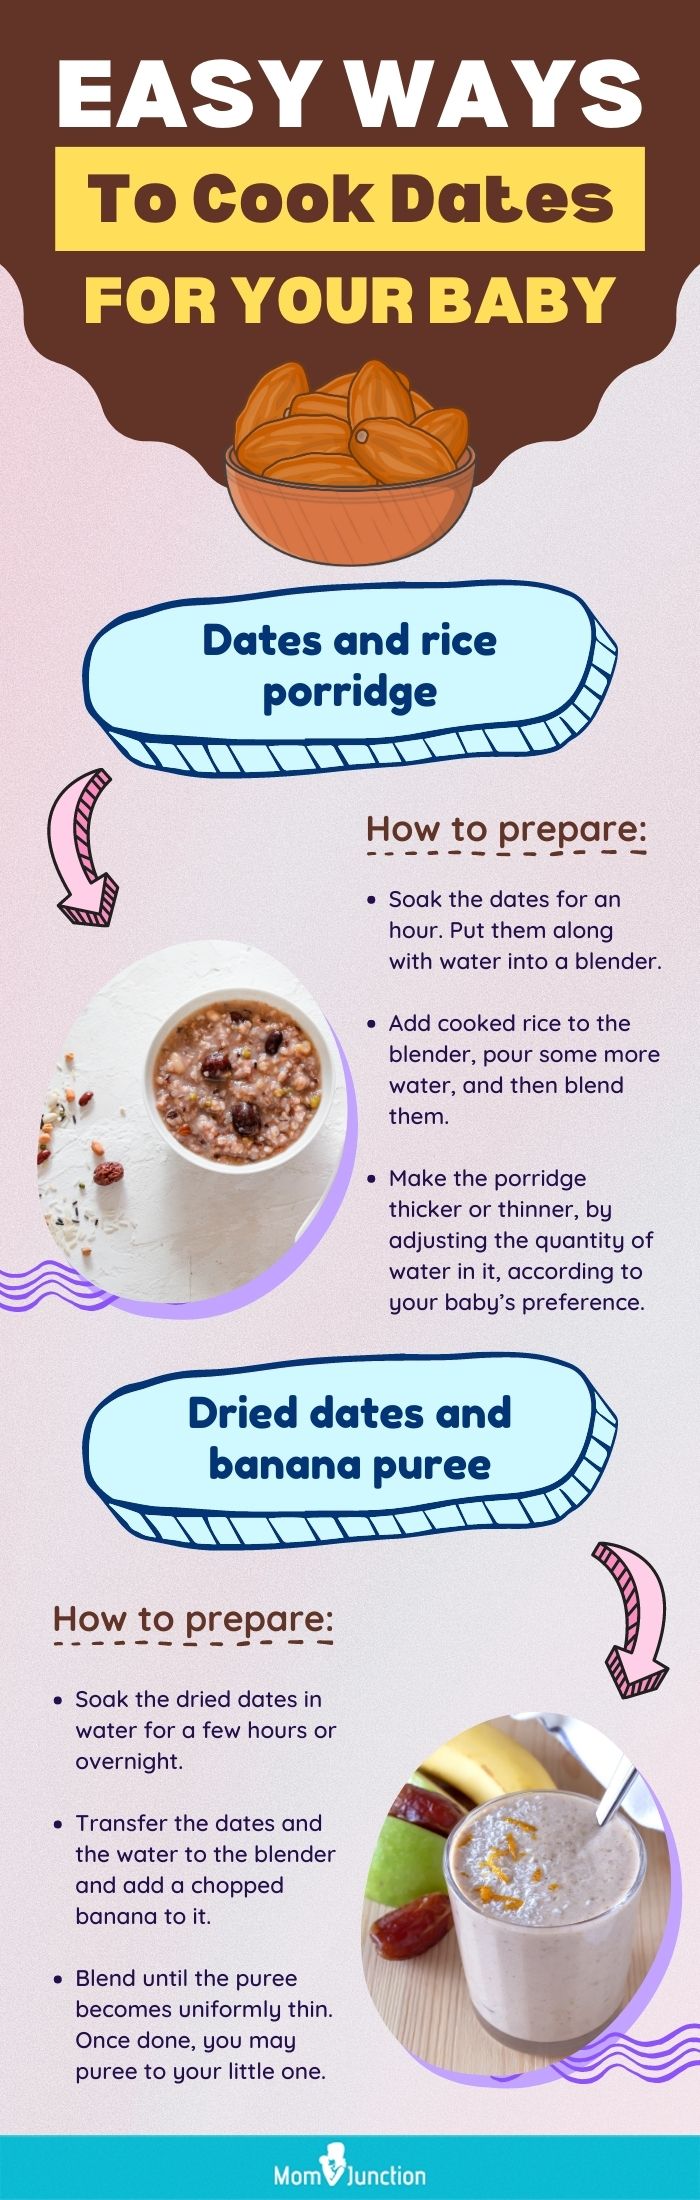 easy ways to cook dates for your baby (infographic)